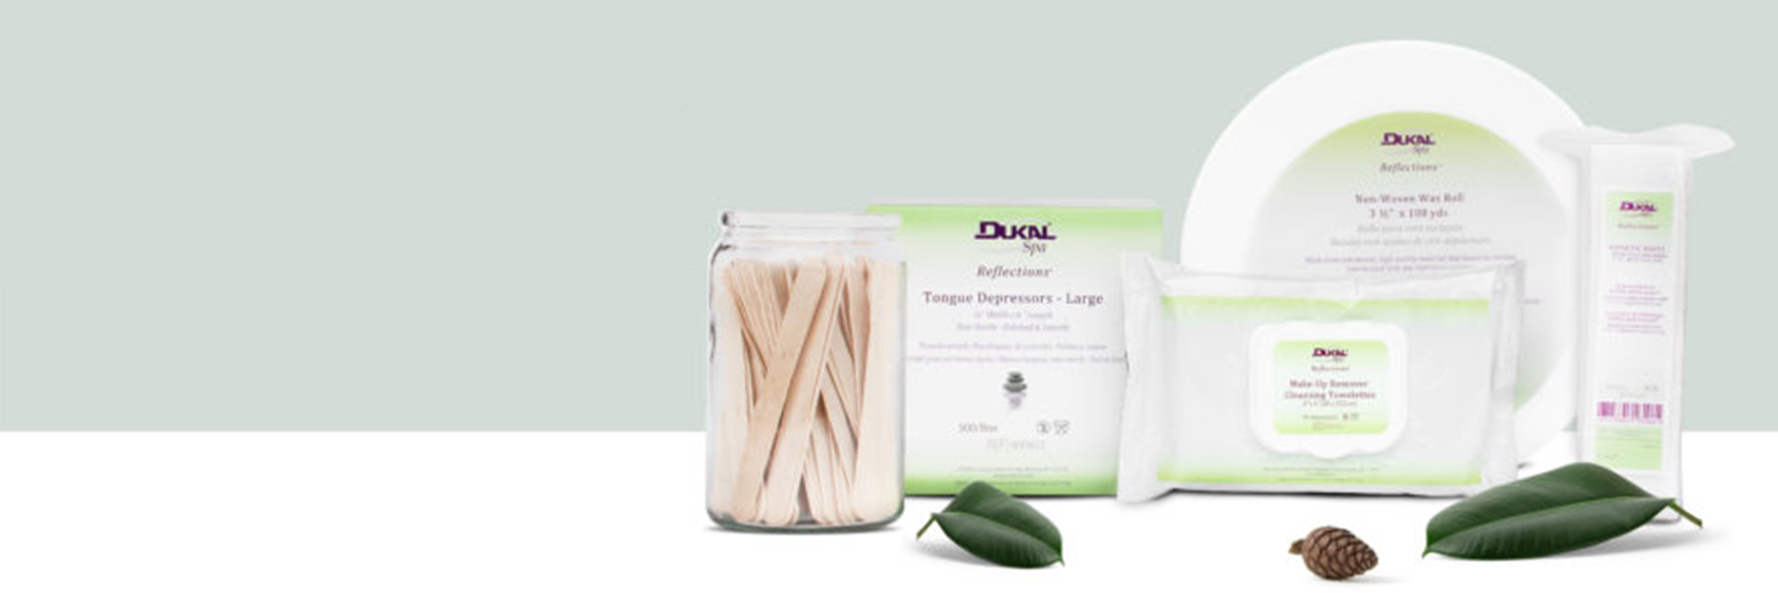 Product Image - Dukal Family of Products - Click to Shop